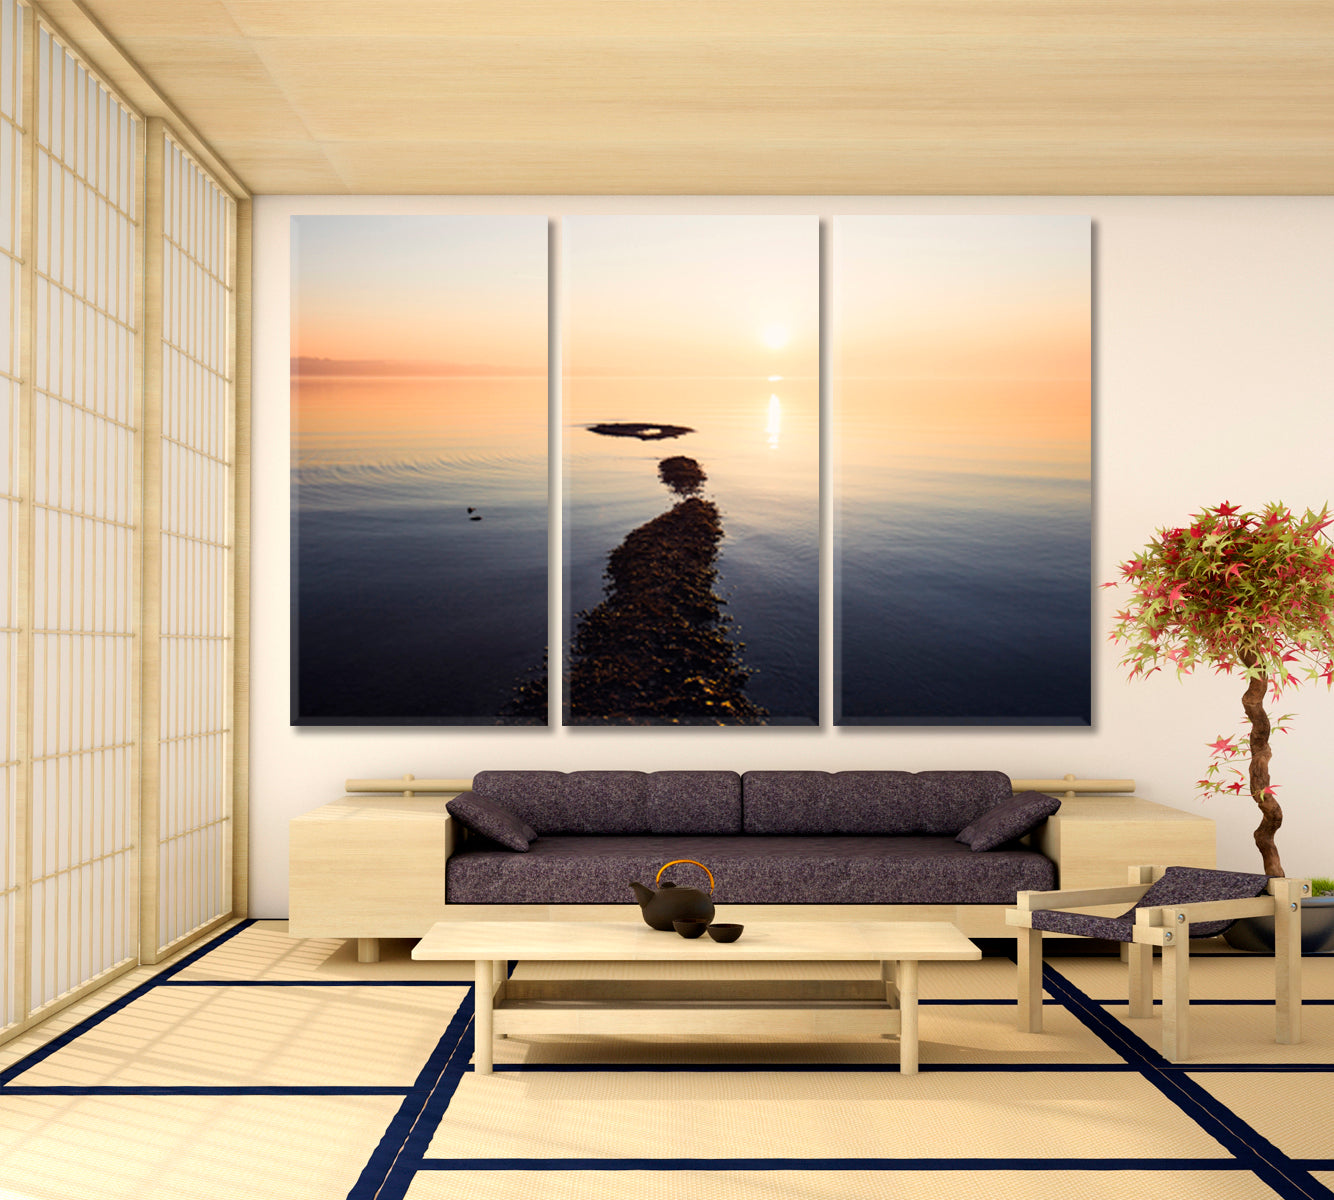 ROAD TO PARADISE Natural Landscape Scenery Sunrise at Bodensee Lake Germany Scenery Landscape Fine Art Print Artesty 3 panels 36" x 24" 